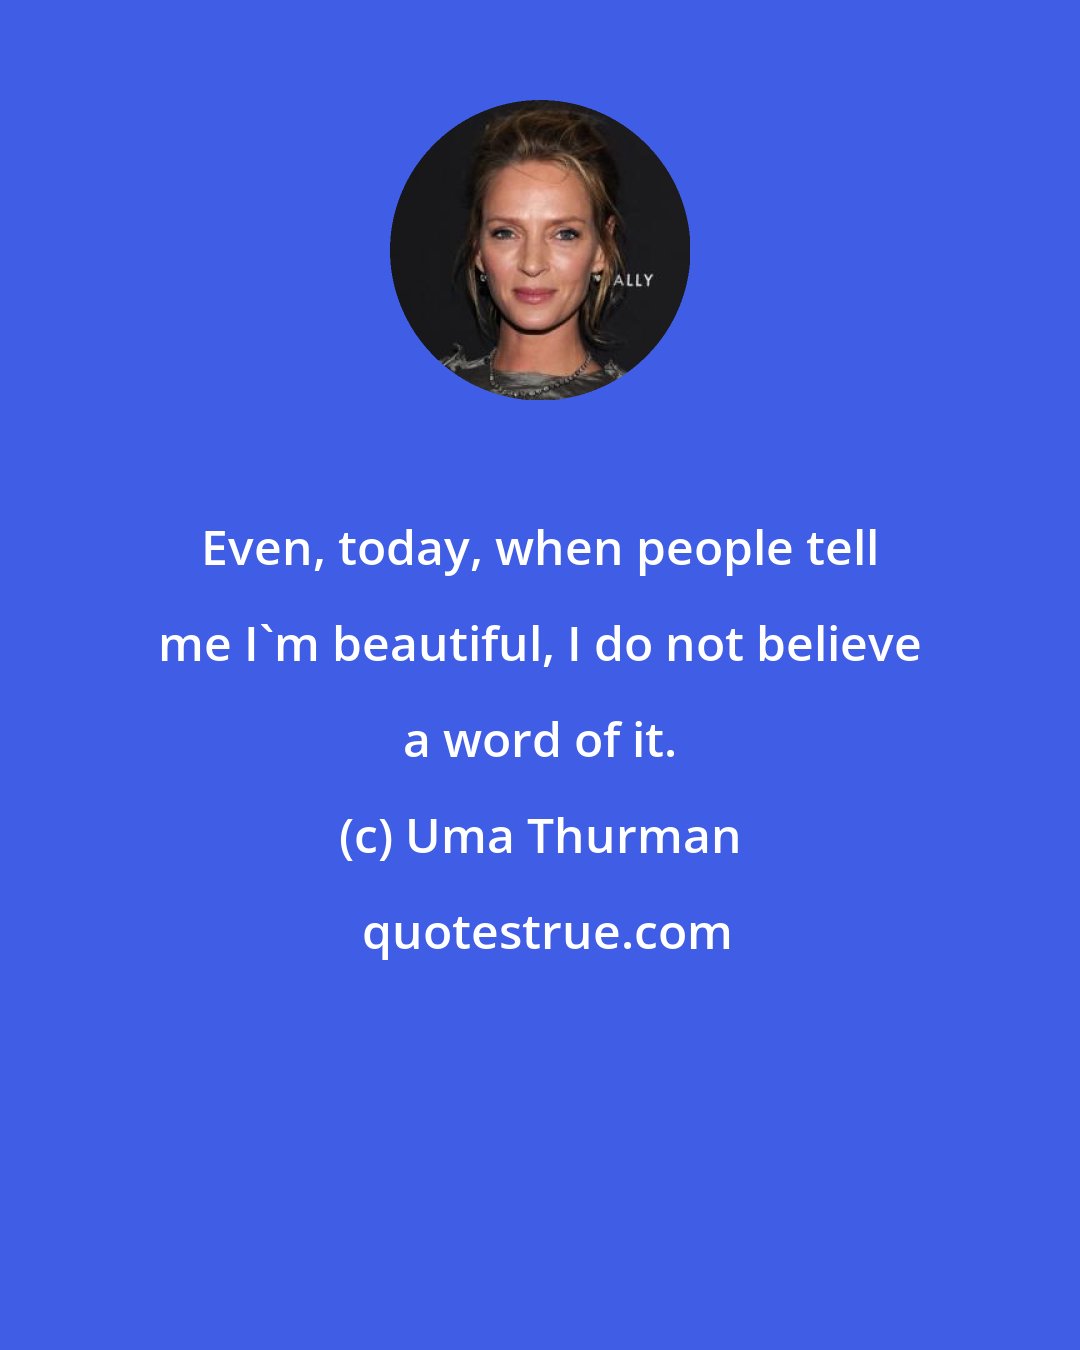 Uma Thurman: Even, today, when people tell me I'm beautiful, I do not believe a word of it.